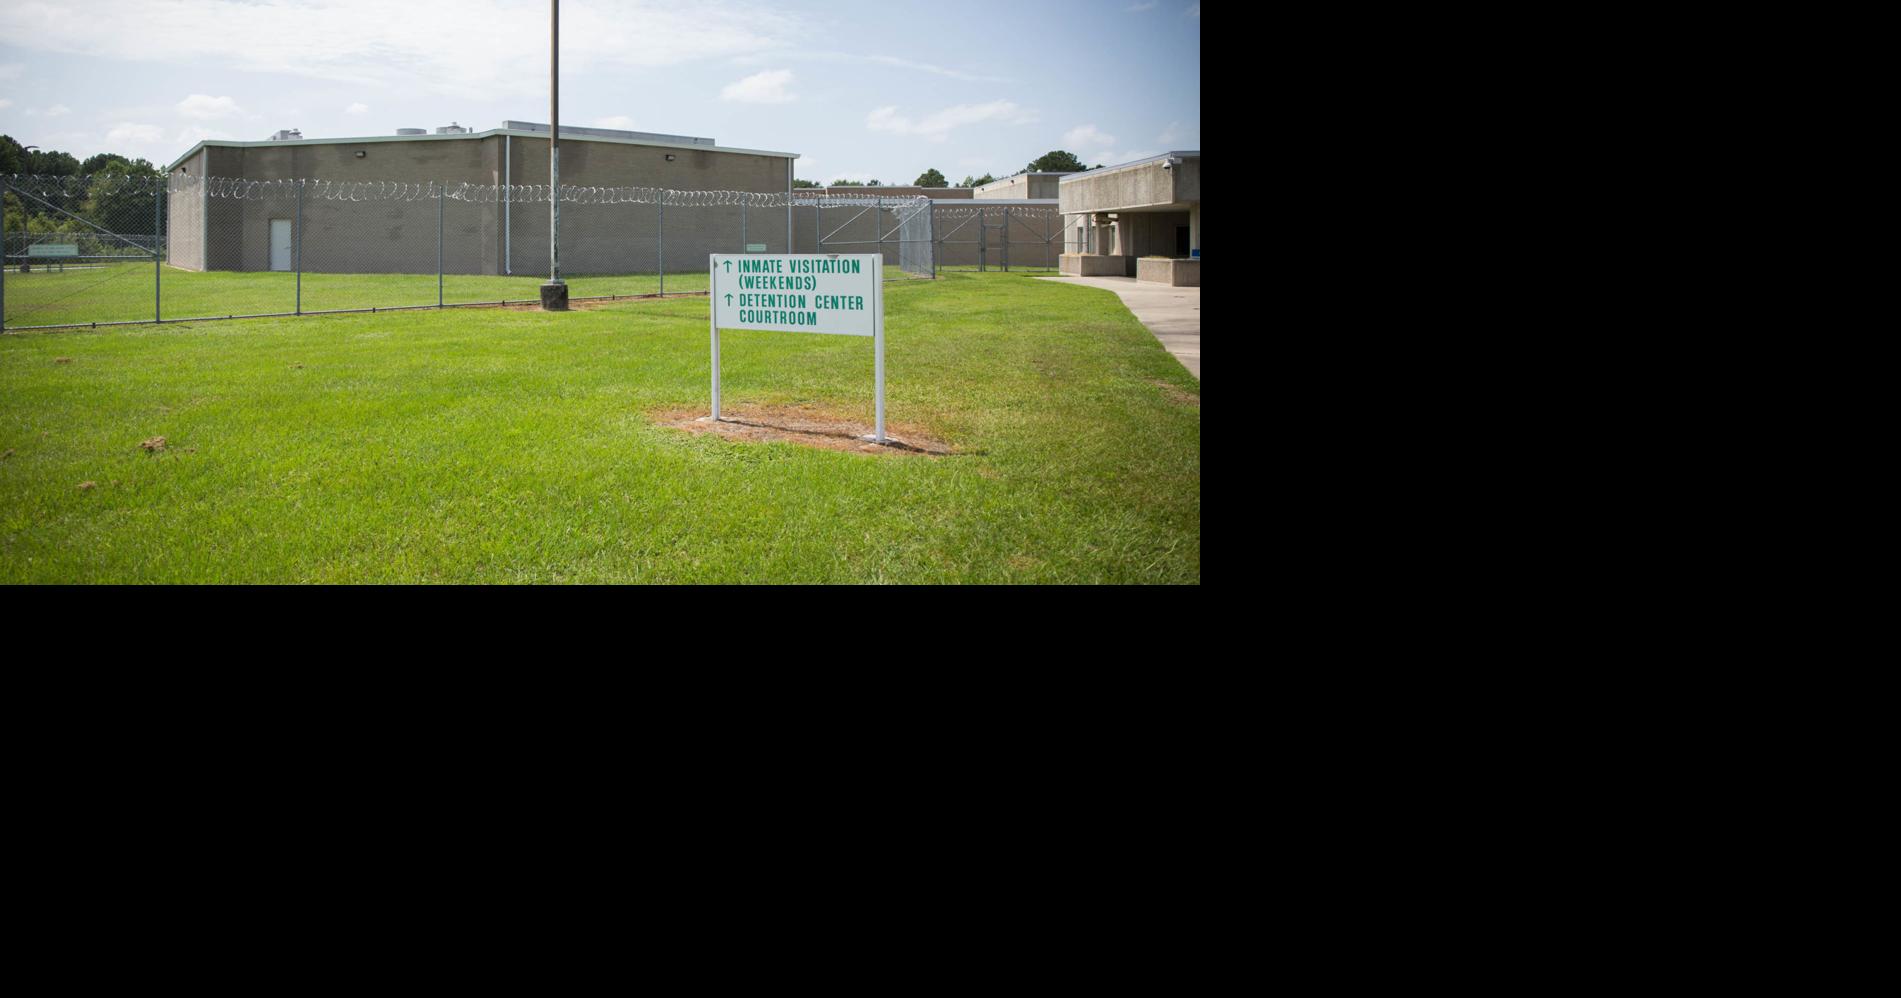 A&E's ‘60 Days In' to feature Pitt County Detention Center | Local News ...